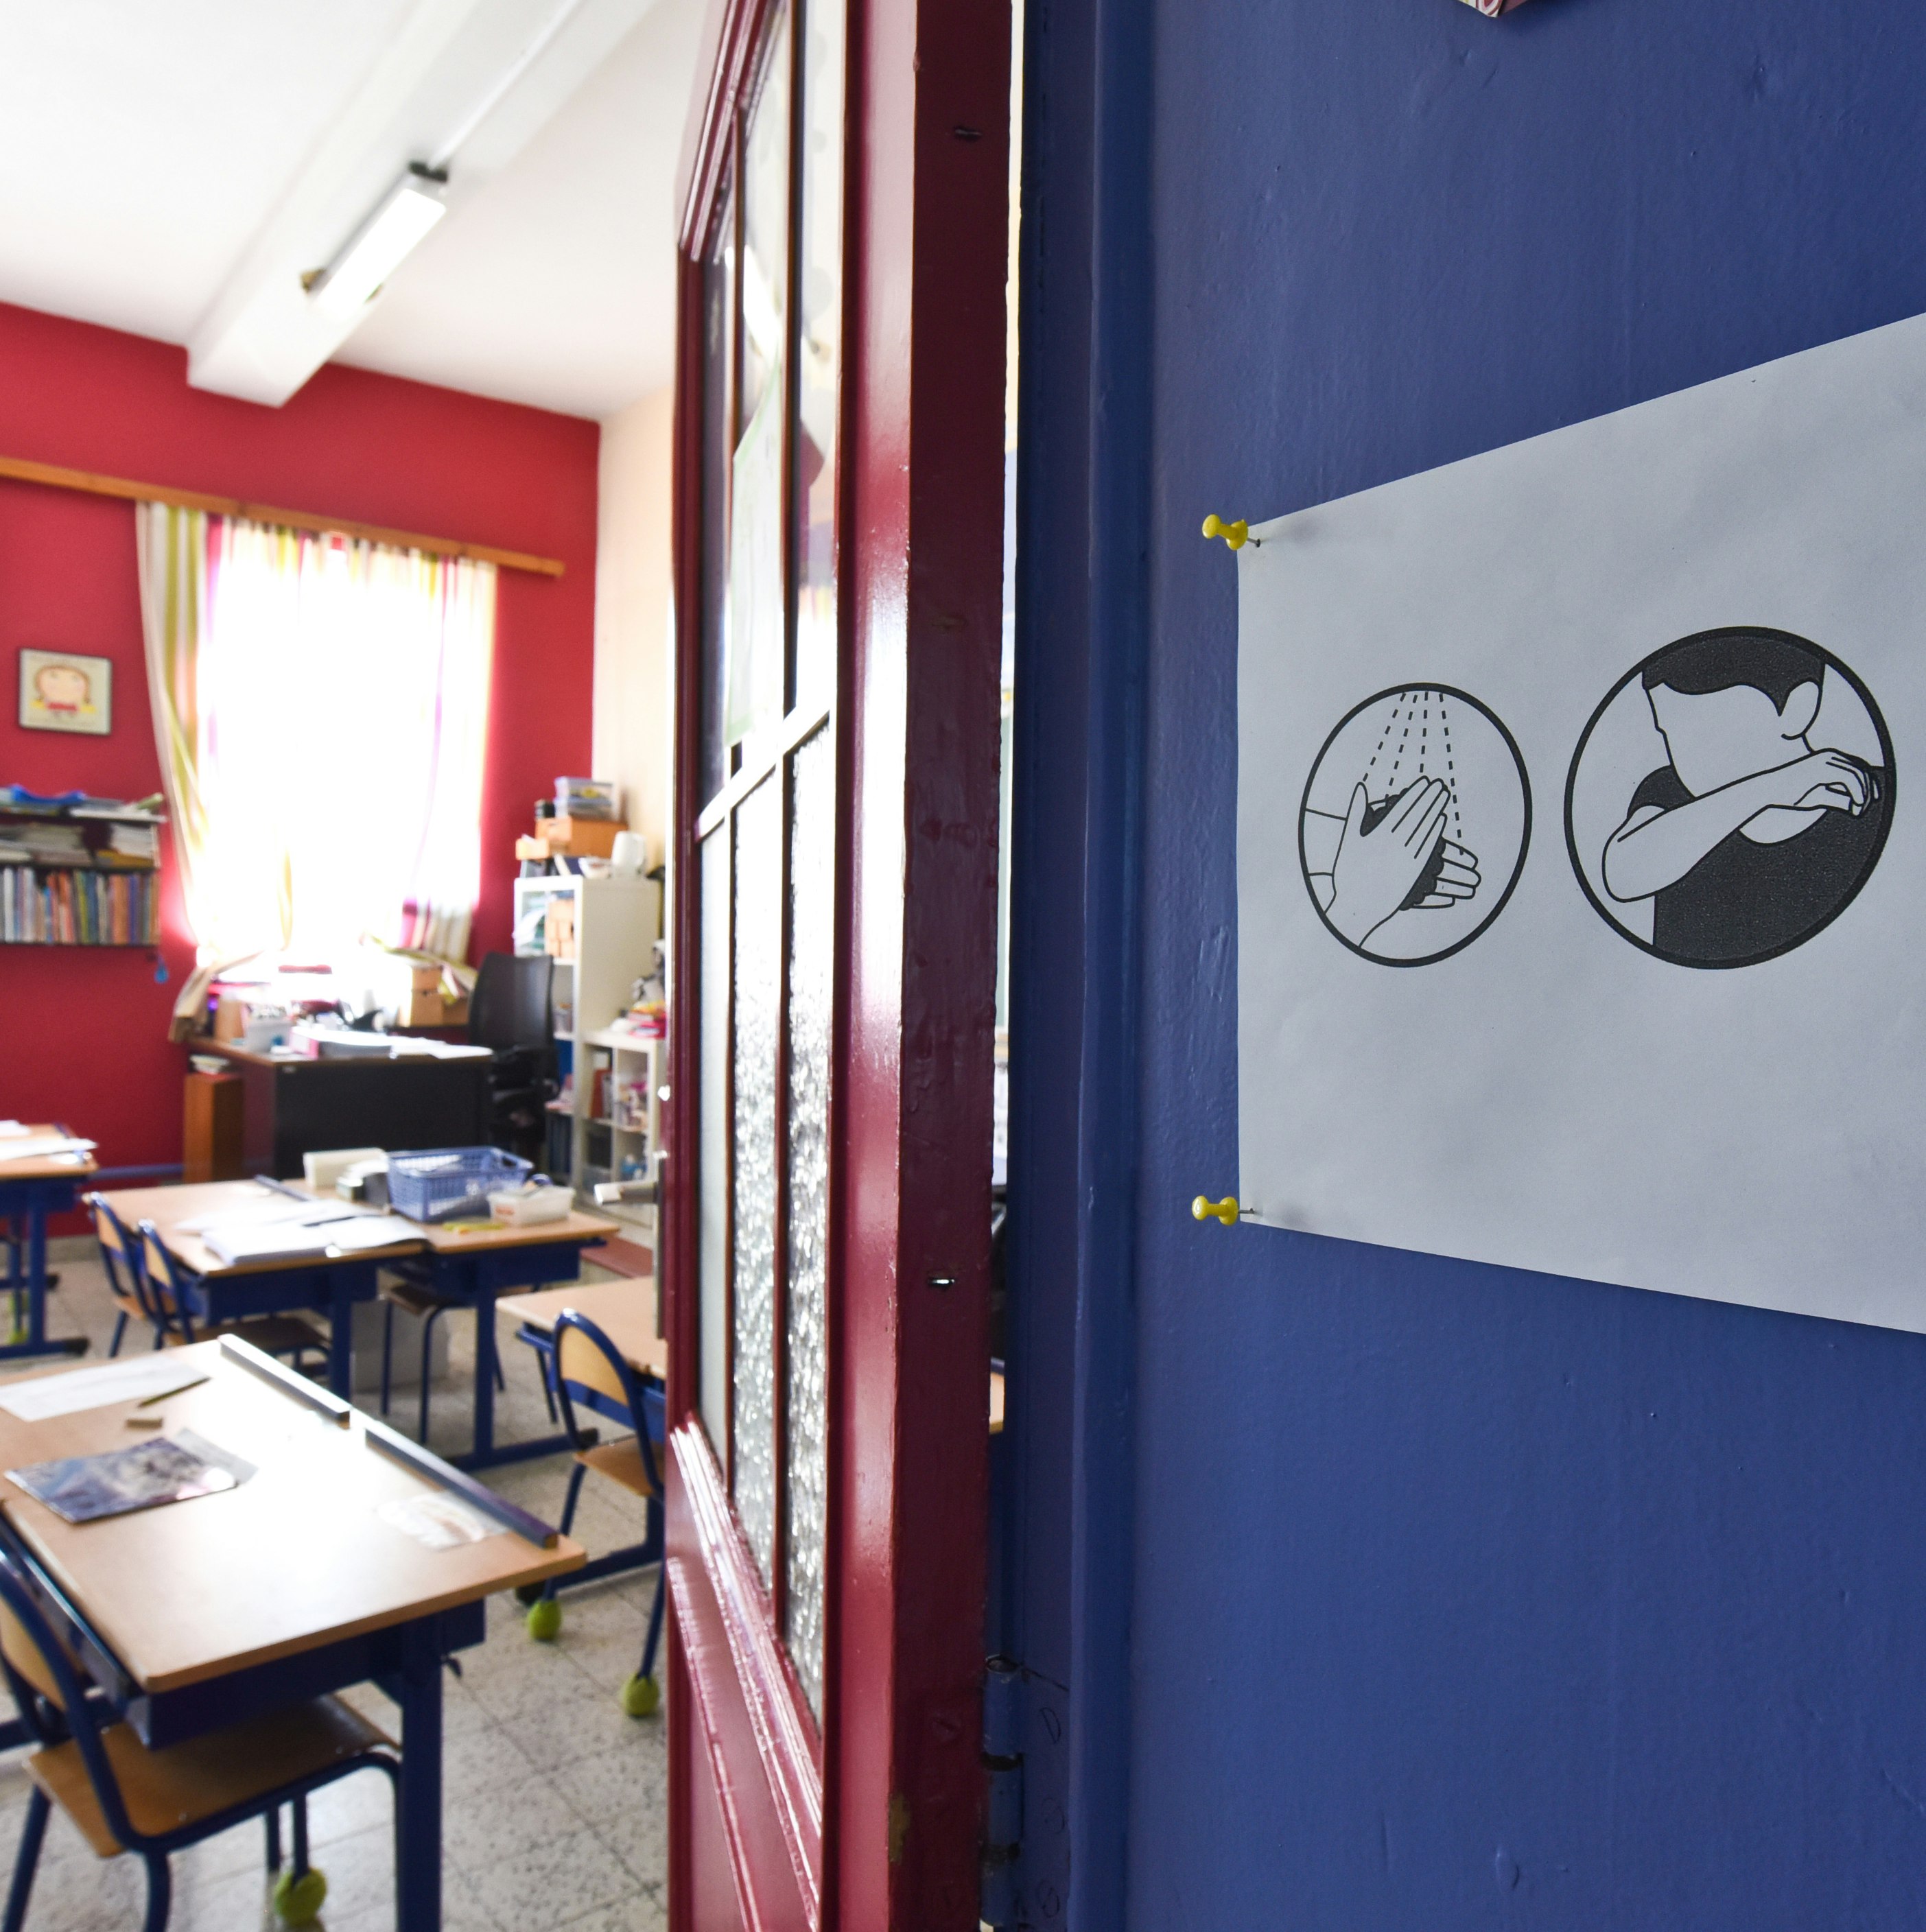 An empty classroom. A sign with instructions on preventing the spread of viruses is posted on the door.